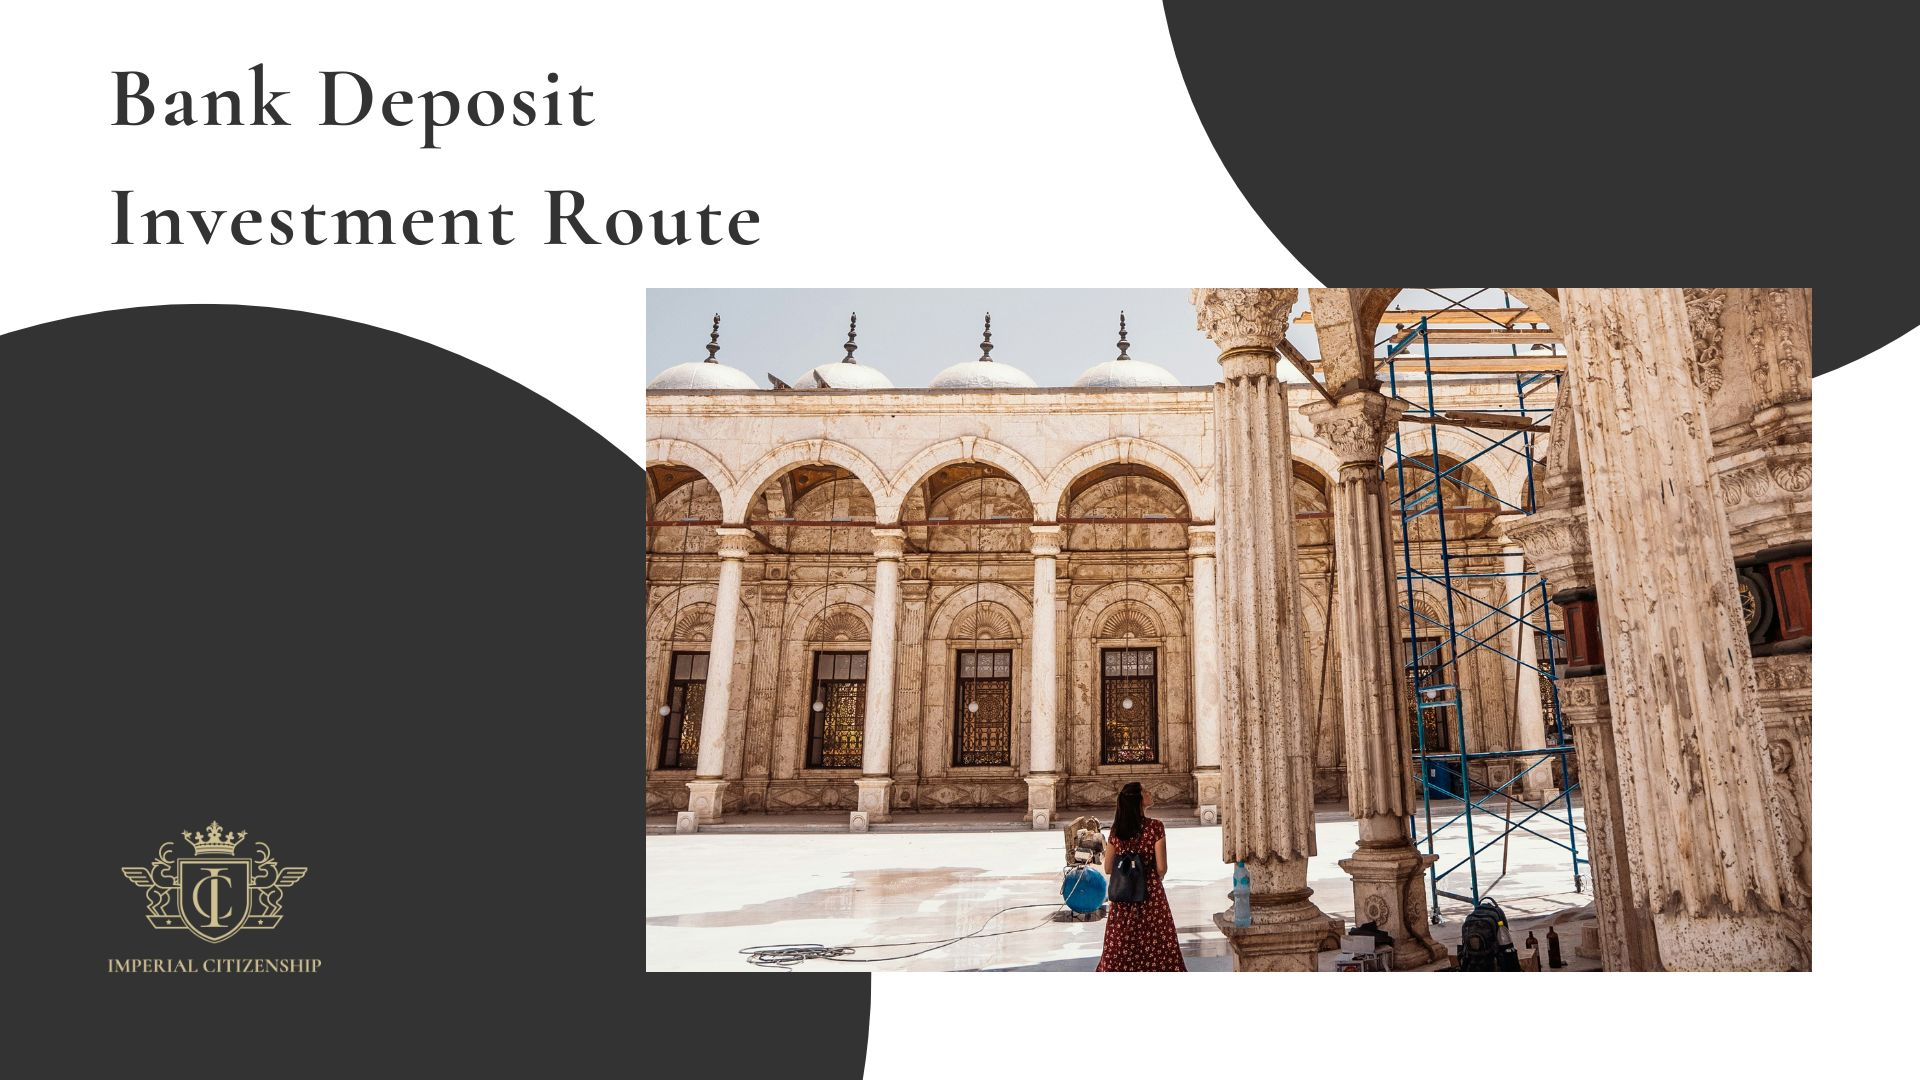 Bank Deposit Investment Route in Egypt